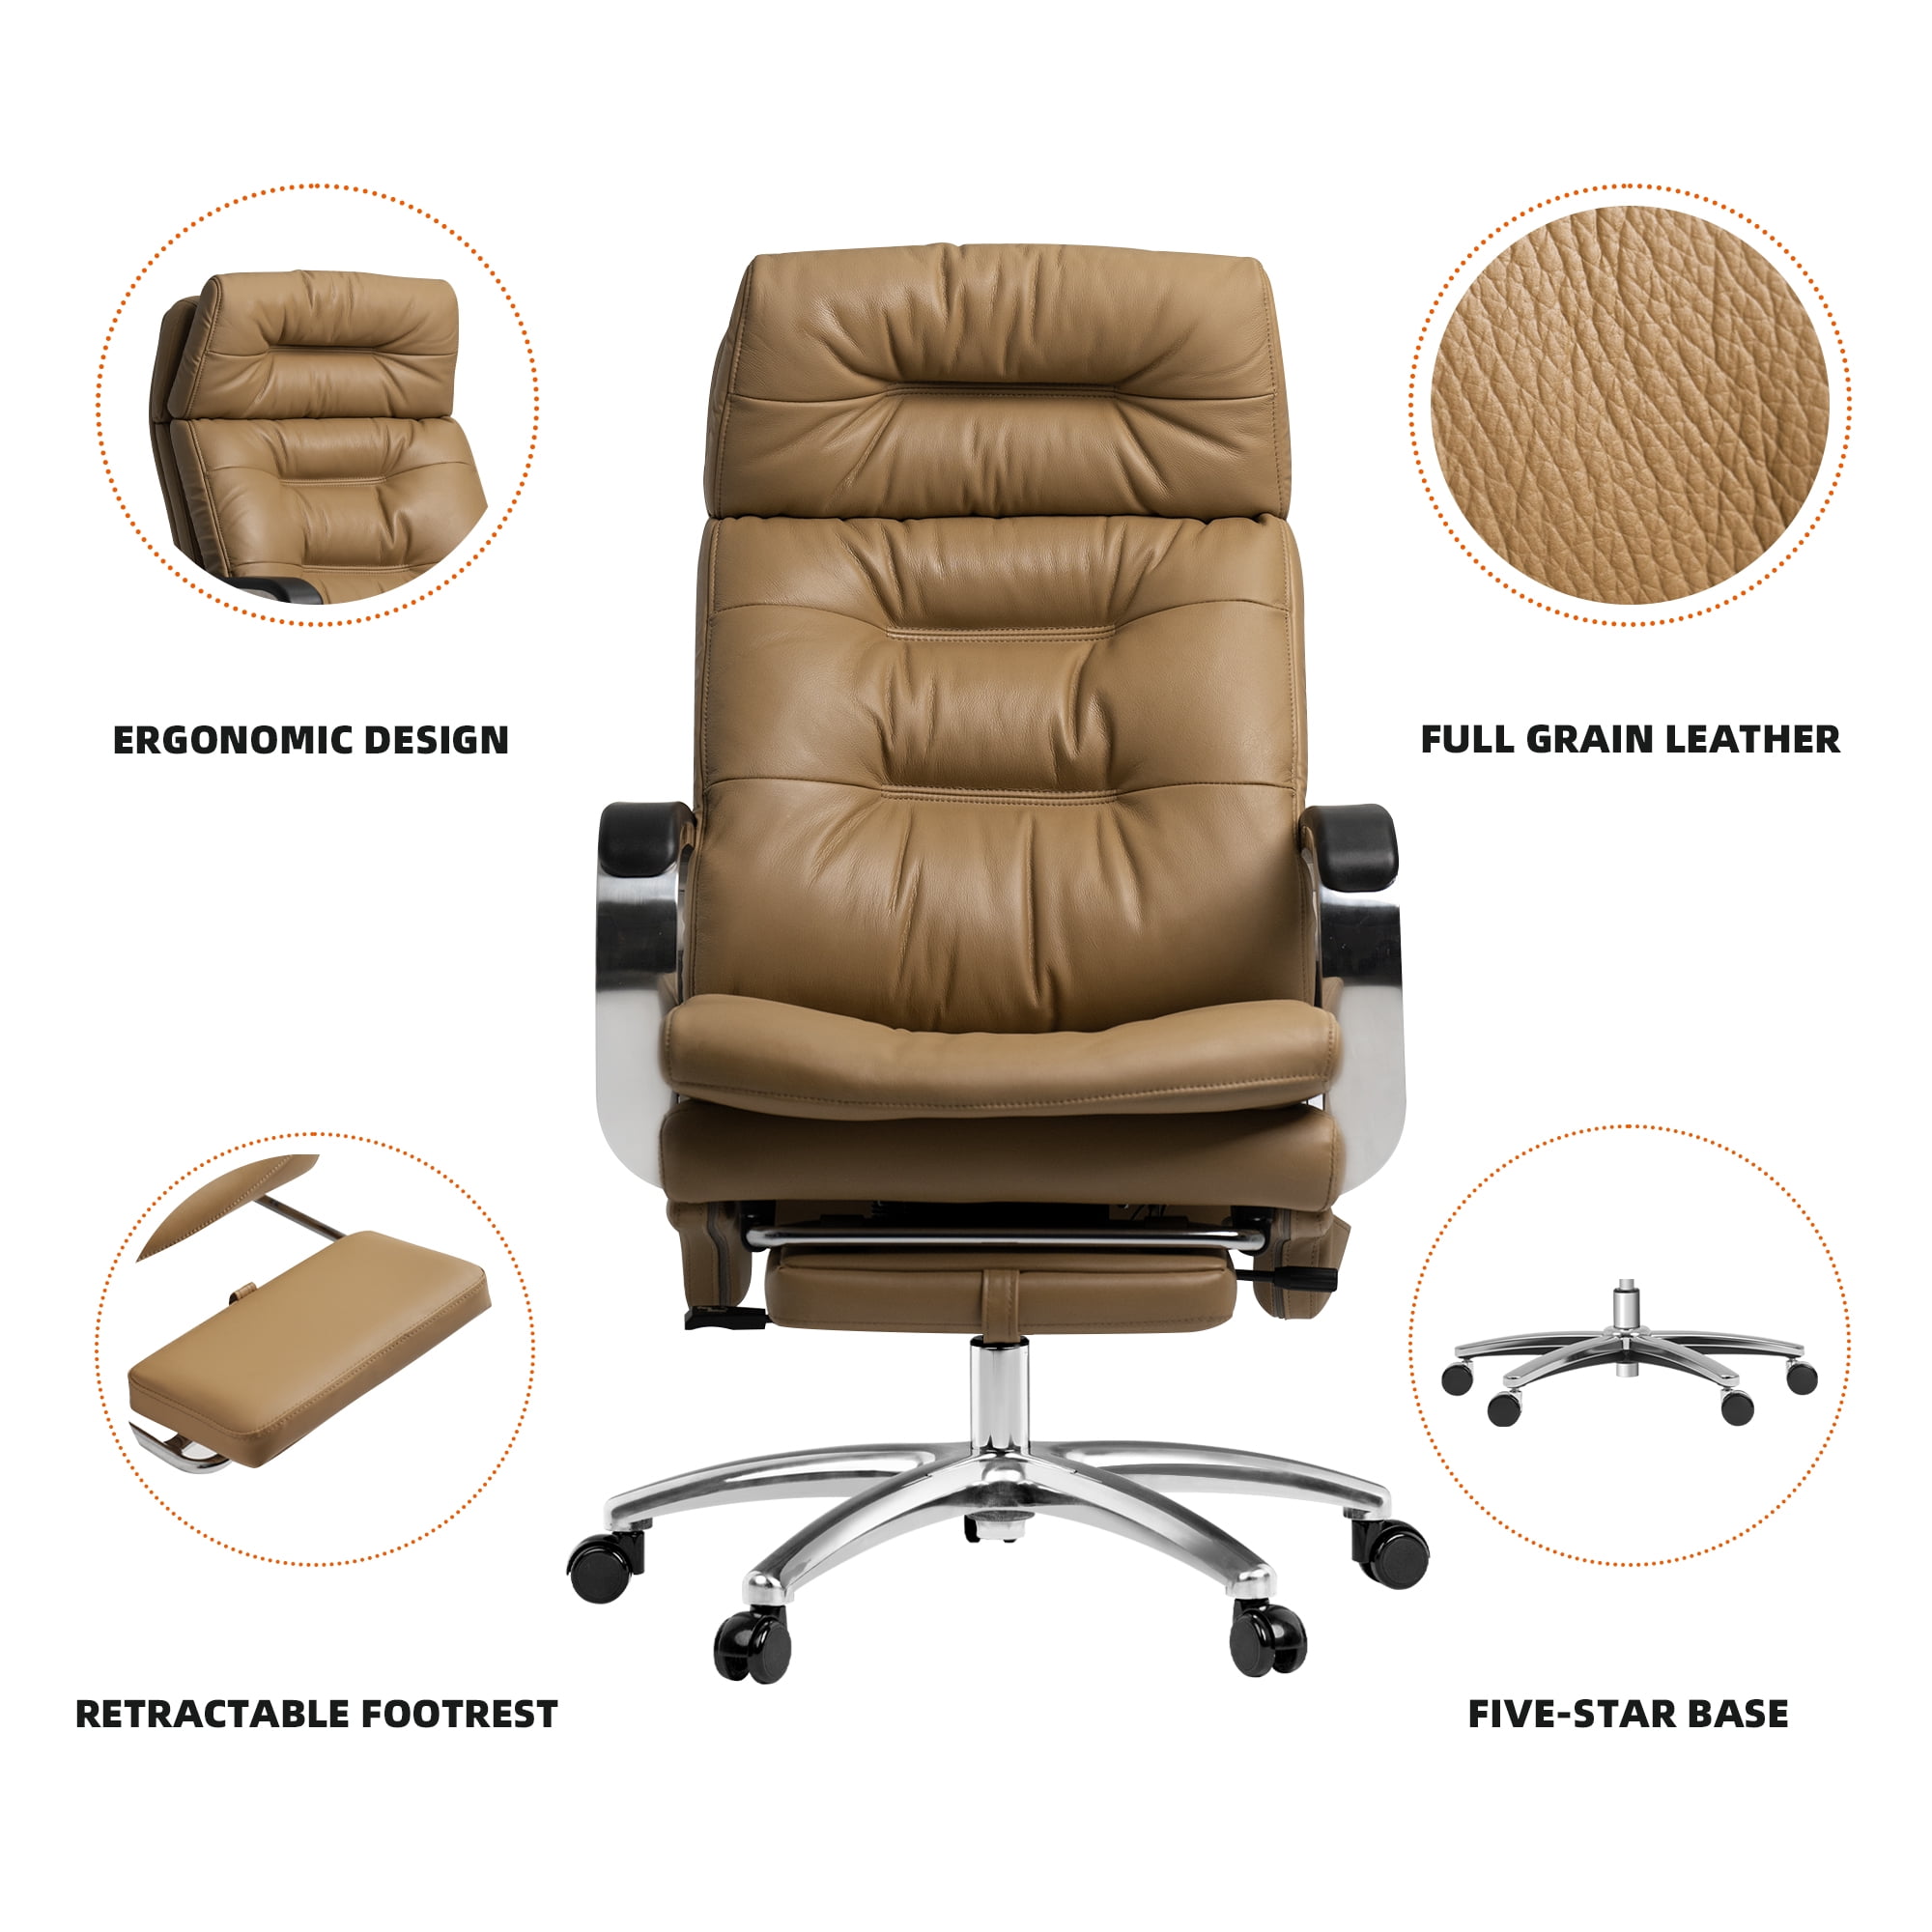 Kinnls Jones Massage Office Chair with Foot Rest Genuine Leather Executive  Office Chair Multifunctional Adjustment Comfortable Office Chair for